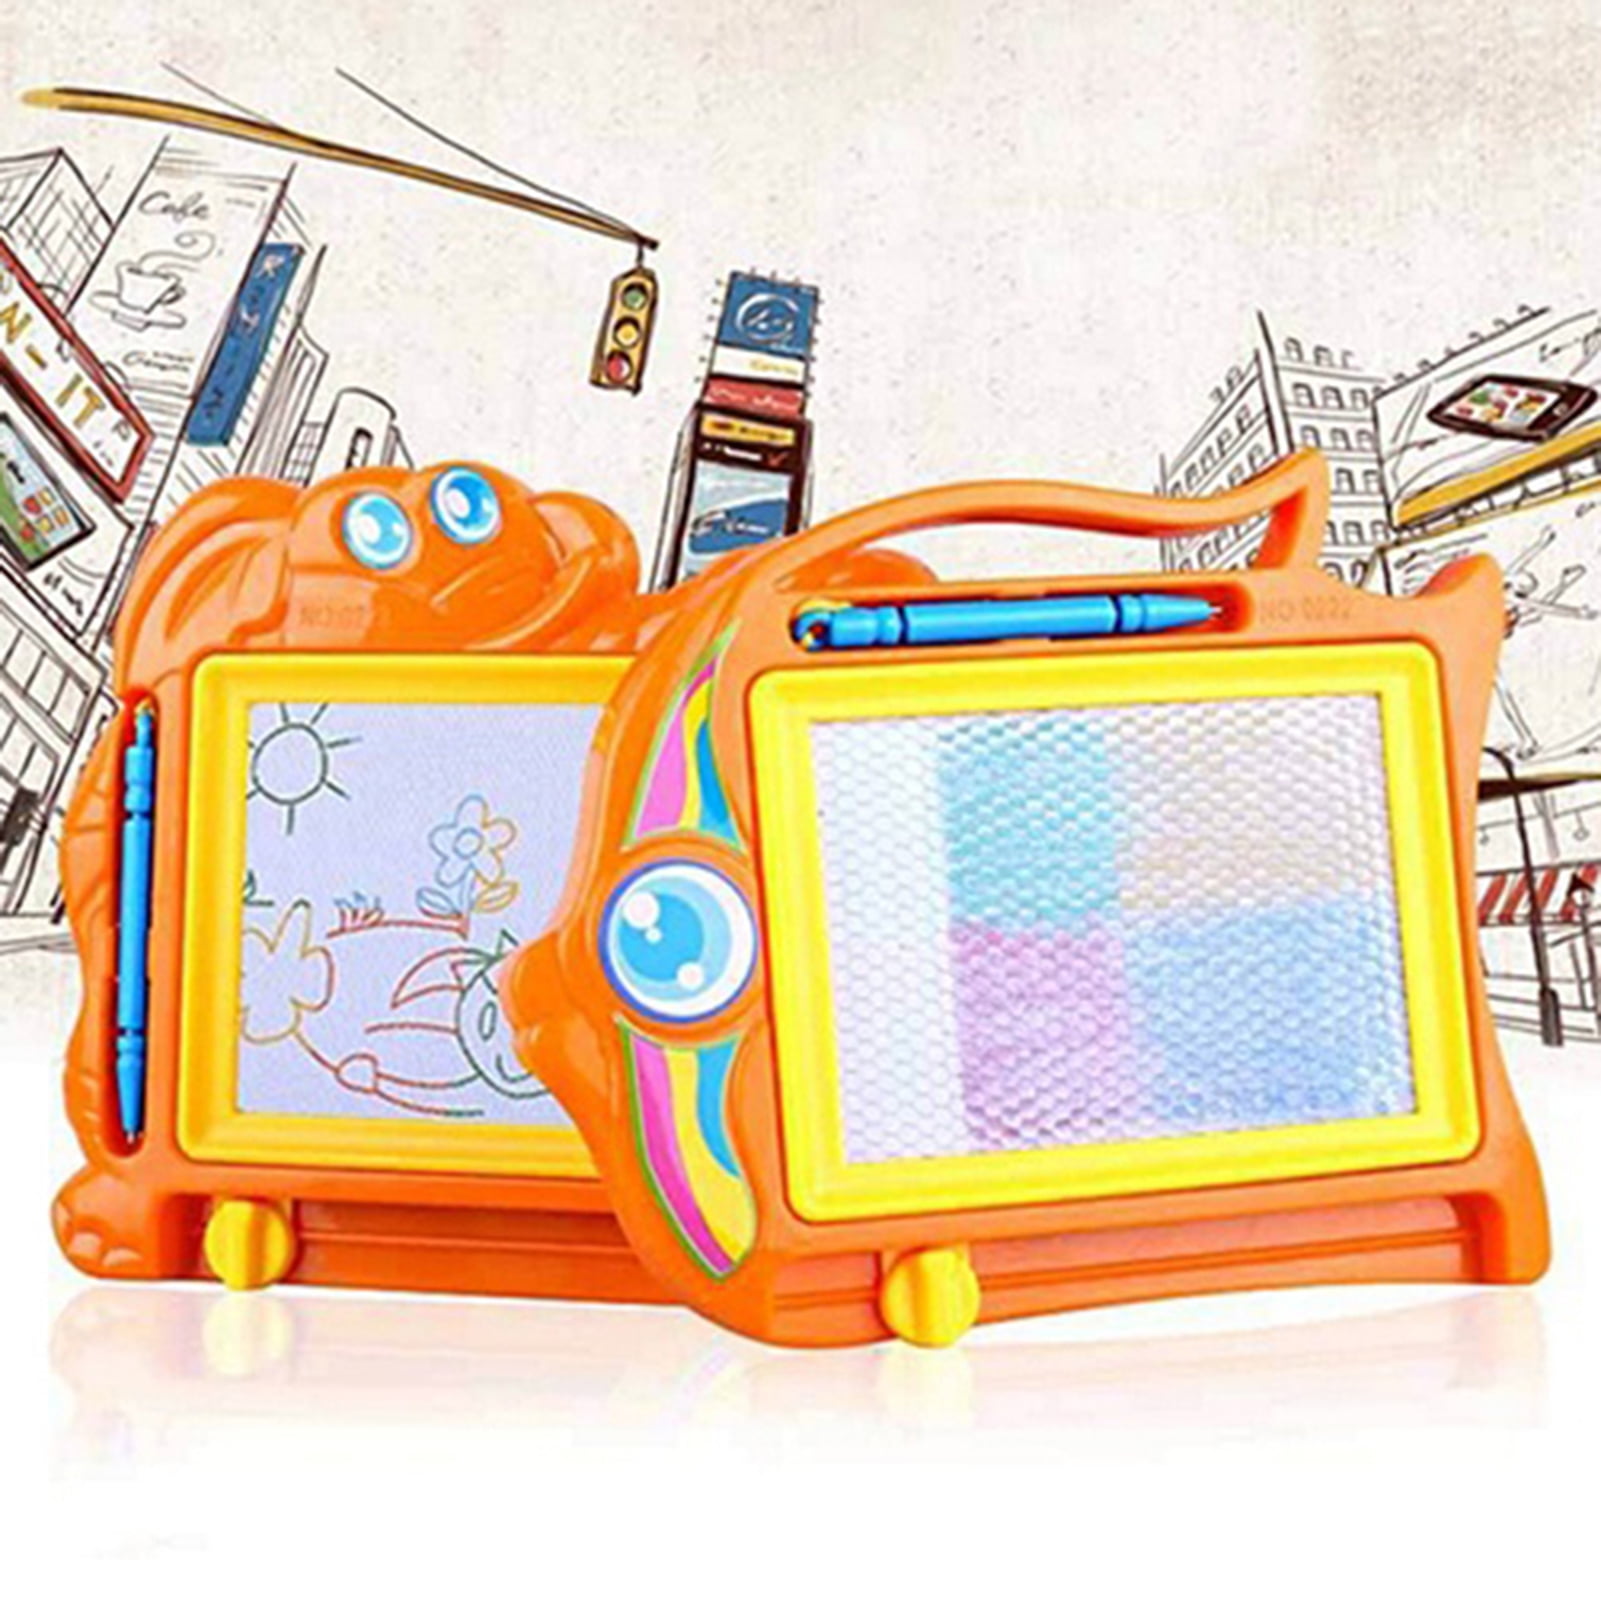 1pc Random Magnetic Drawing Board, Cute Drawing Board For Children